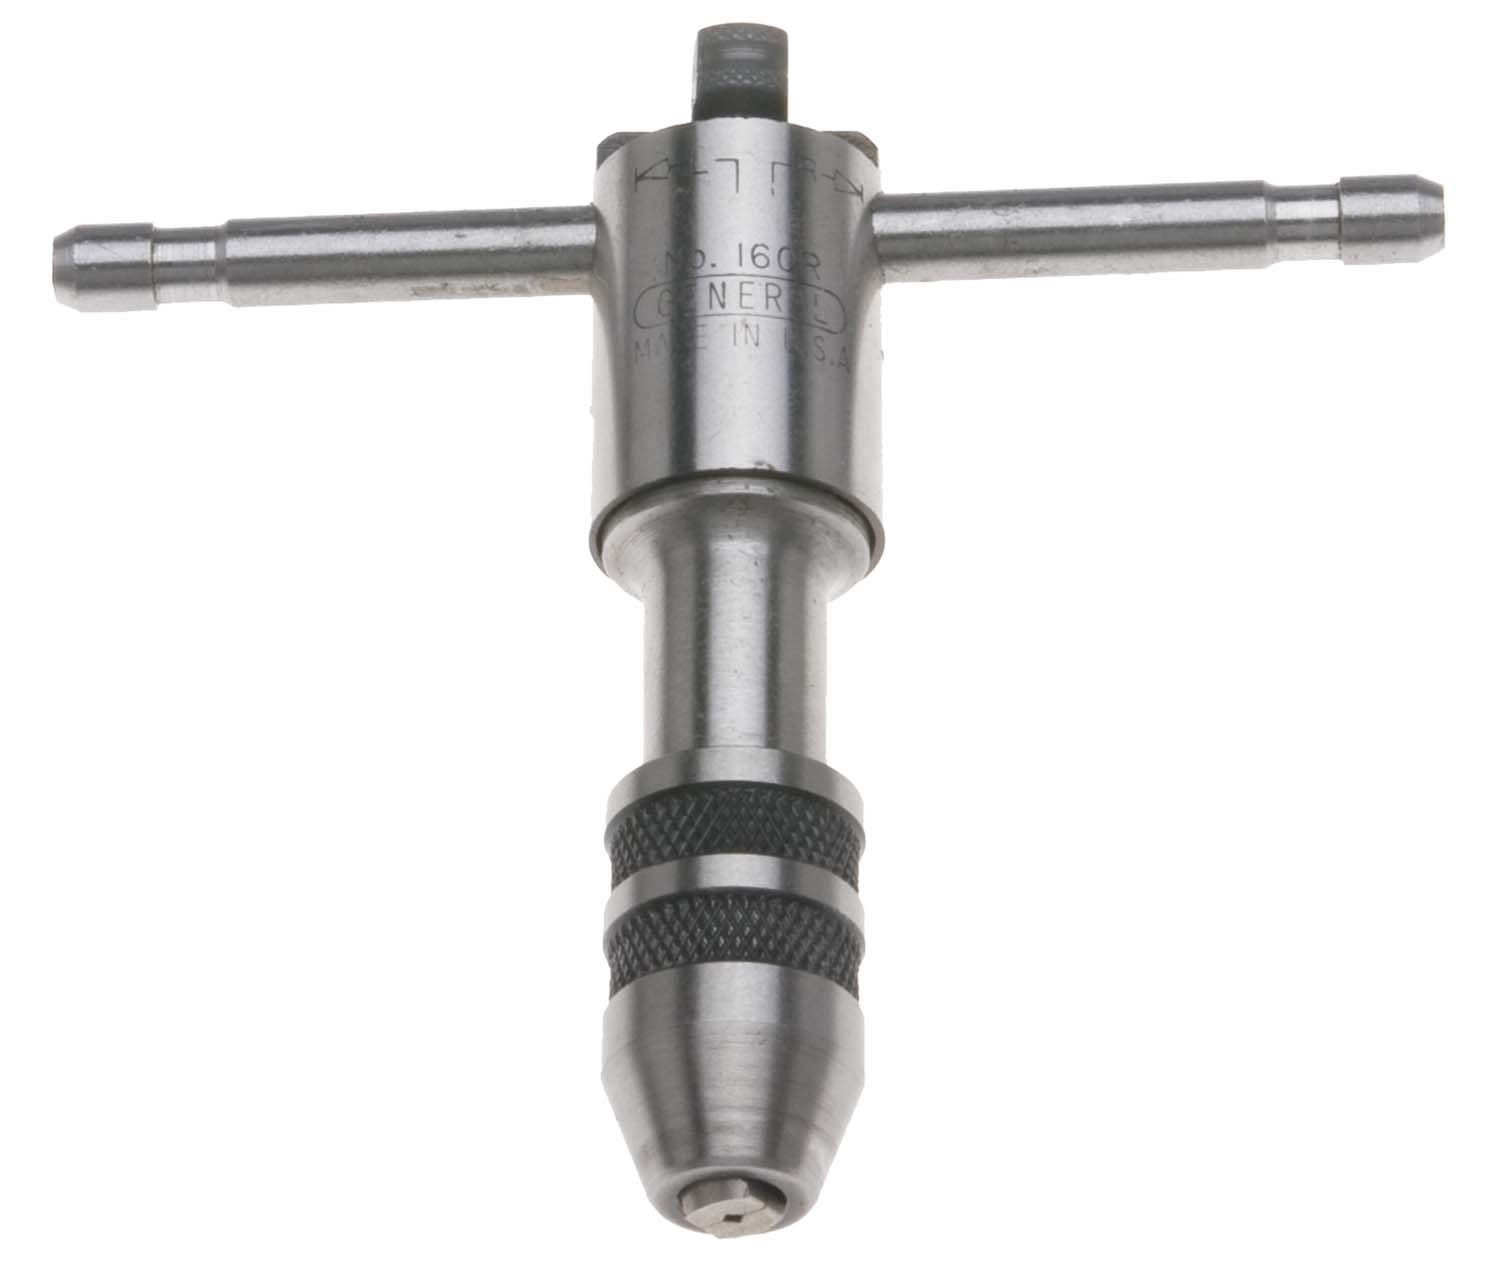 General 161R 0-1/4" Ratchet T-Handle Tap Wrench